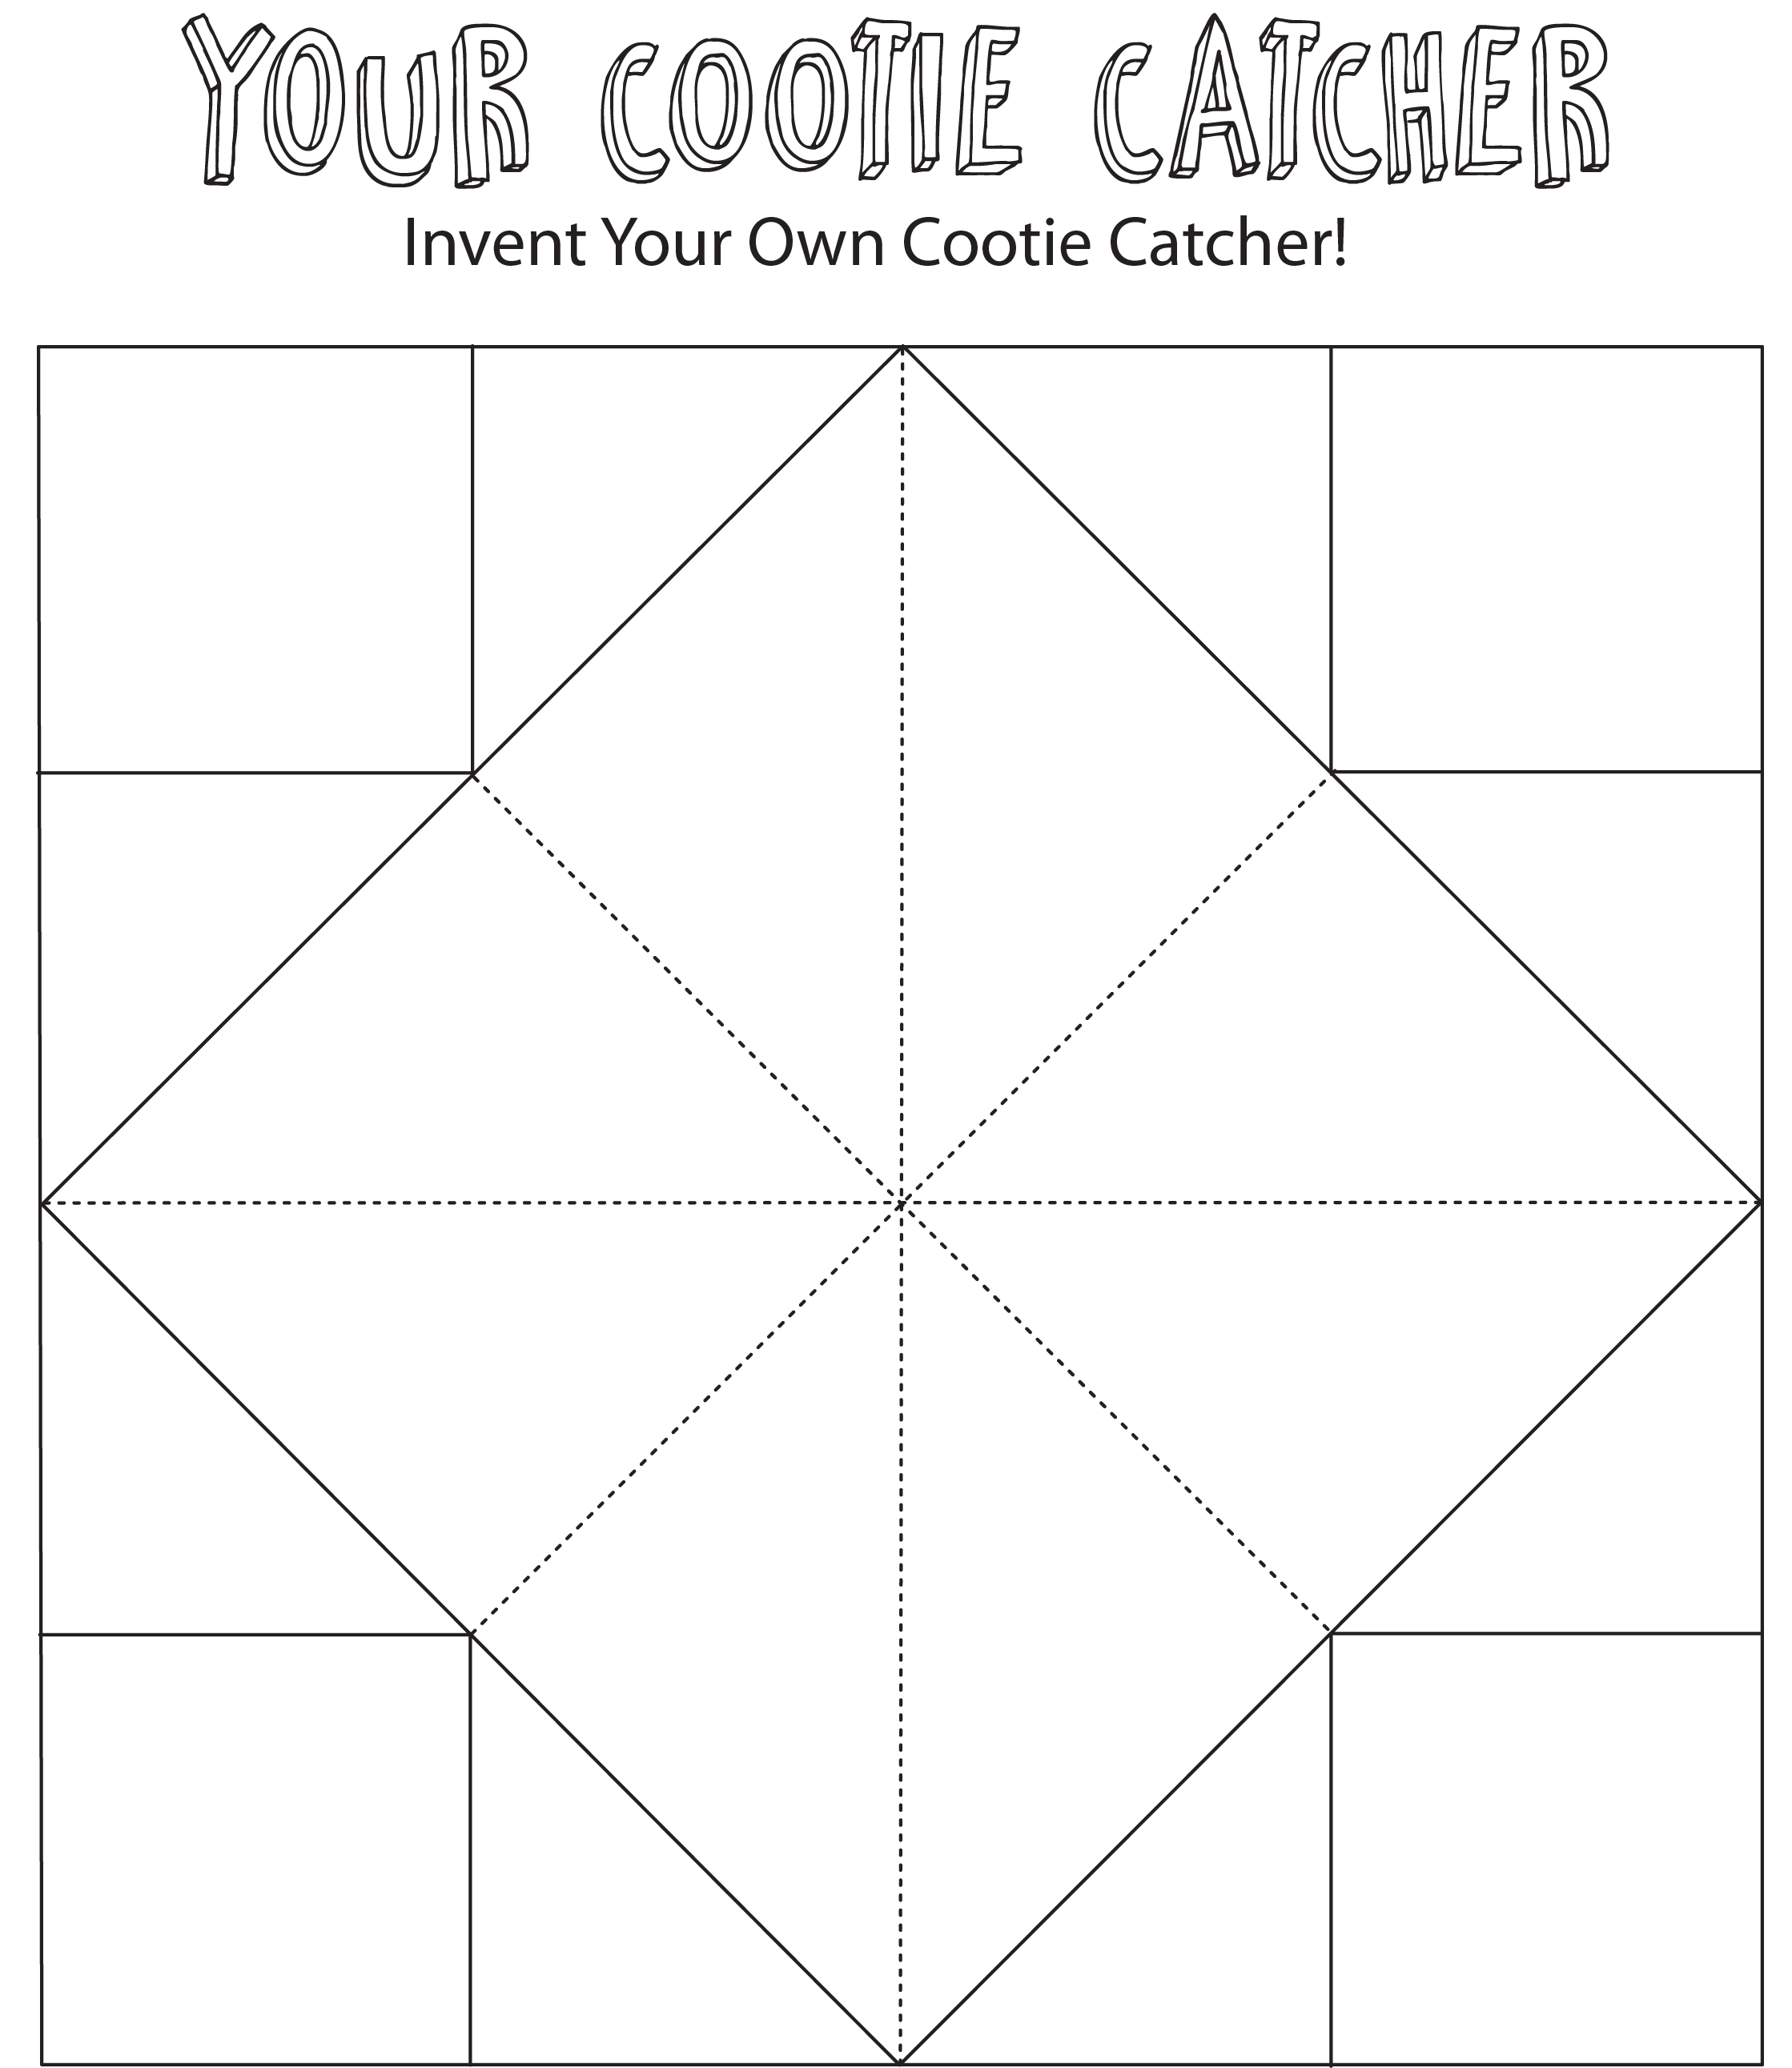 How to Play the Cootie Catcher Drawing Game Fun for Kids Who Love to